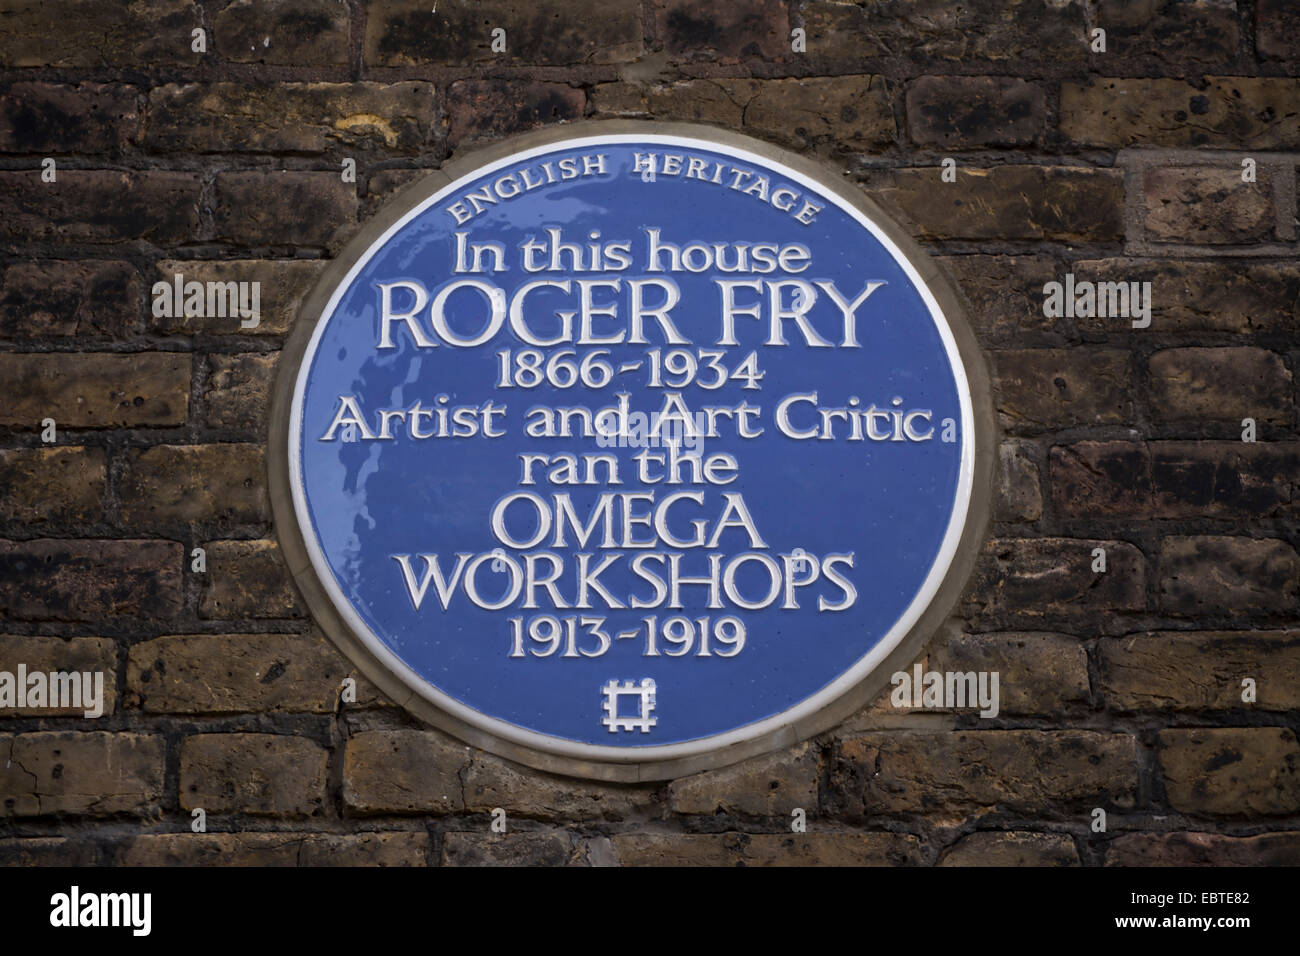 english heritage blue plaque marking the site of artist roger fry's omega workshops, fitzroy square, london, england Stock Photo